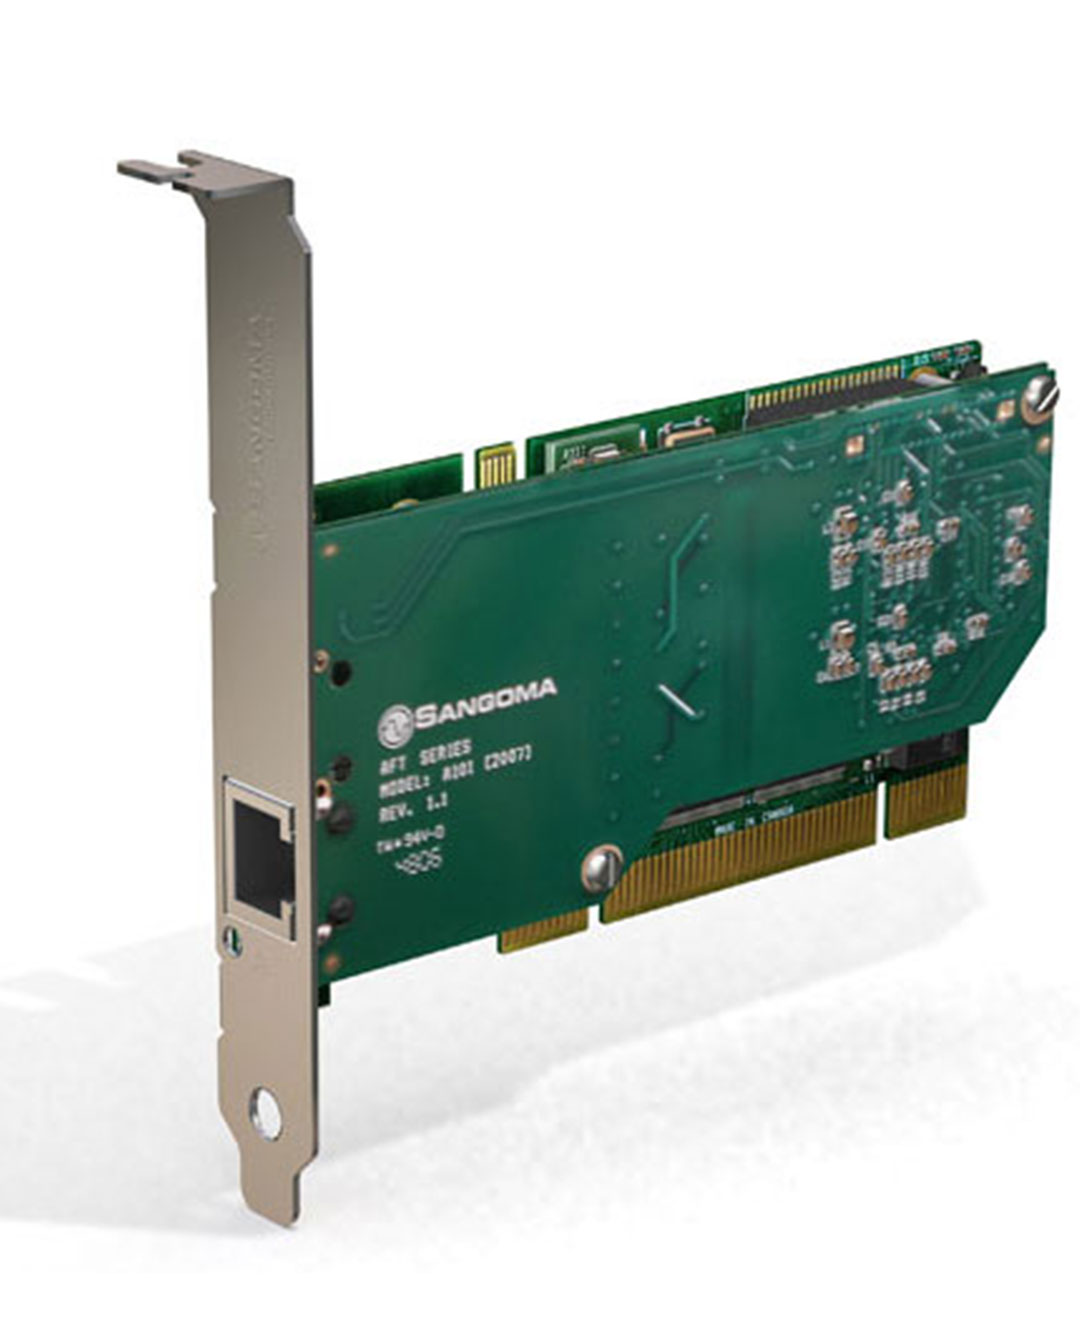 A101
Single voice and data card